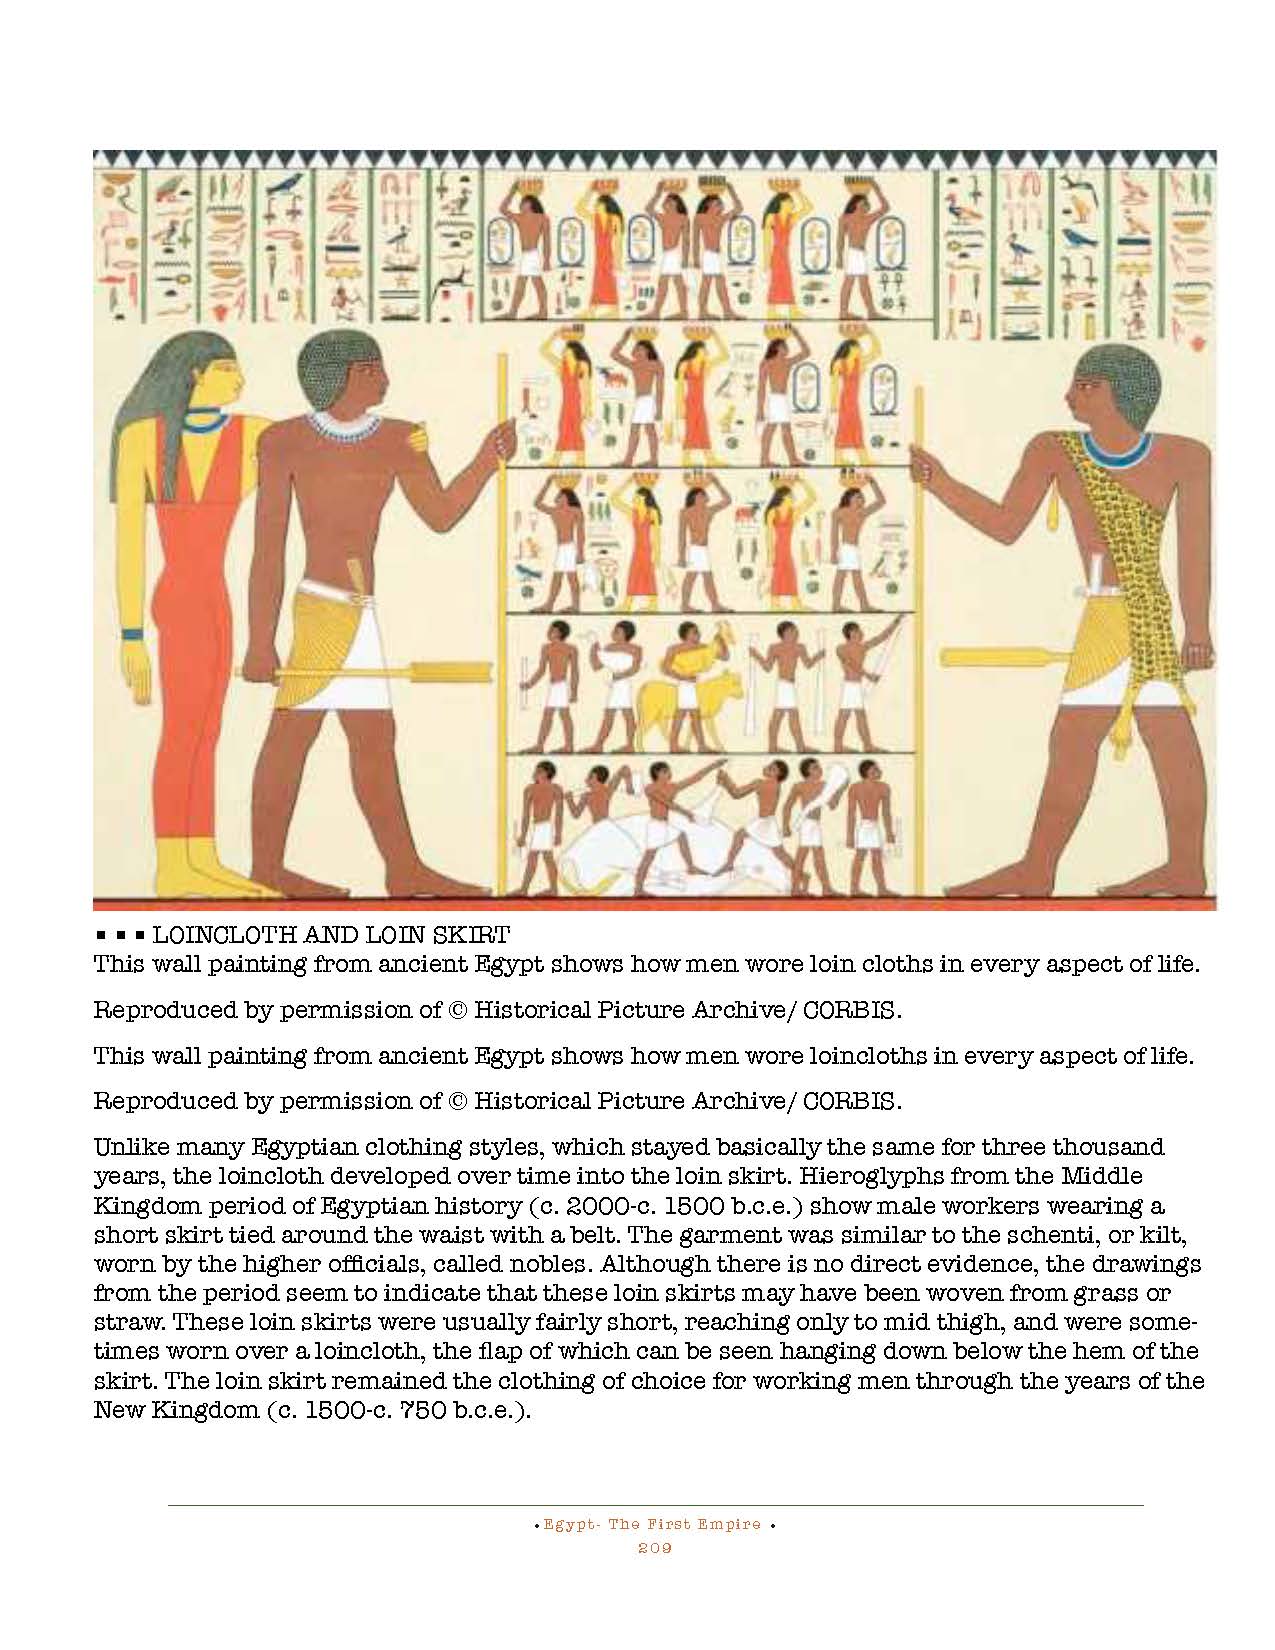 HOCE- Egypt  (First Empire) Notes_Page_209.jpg